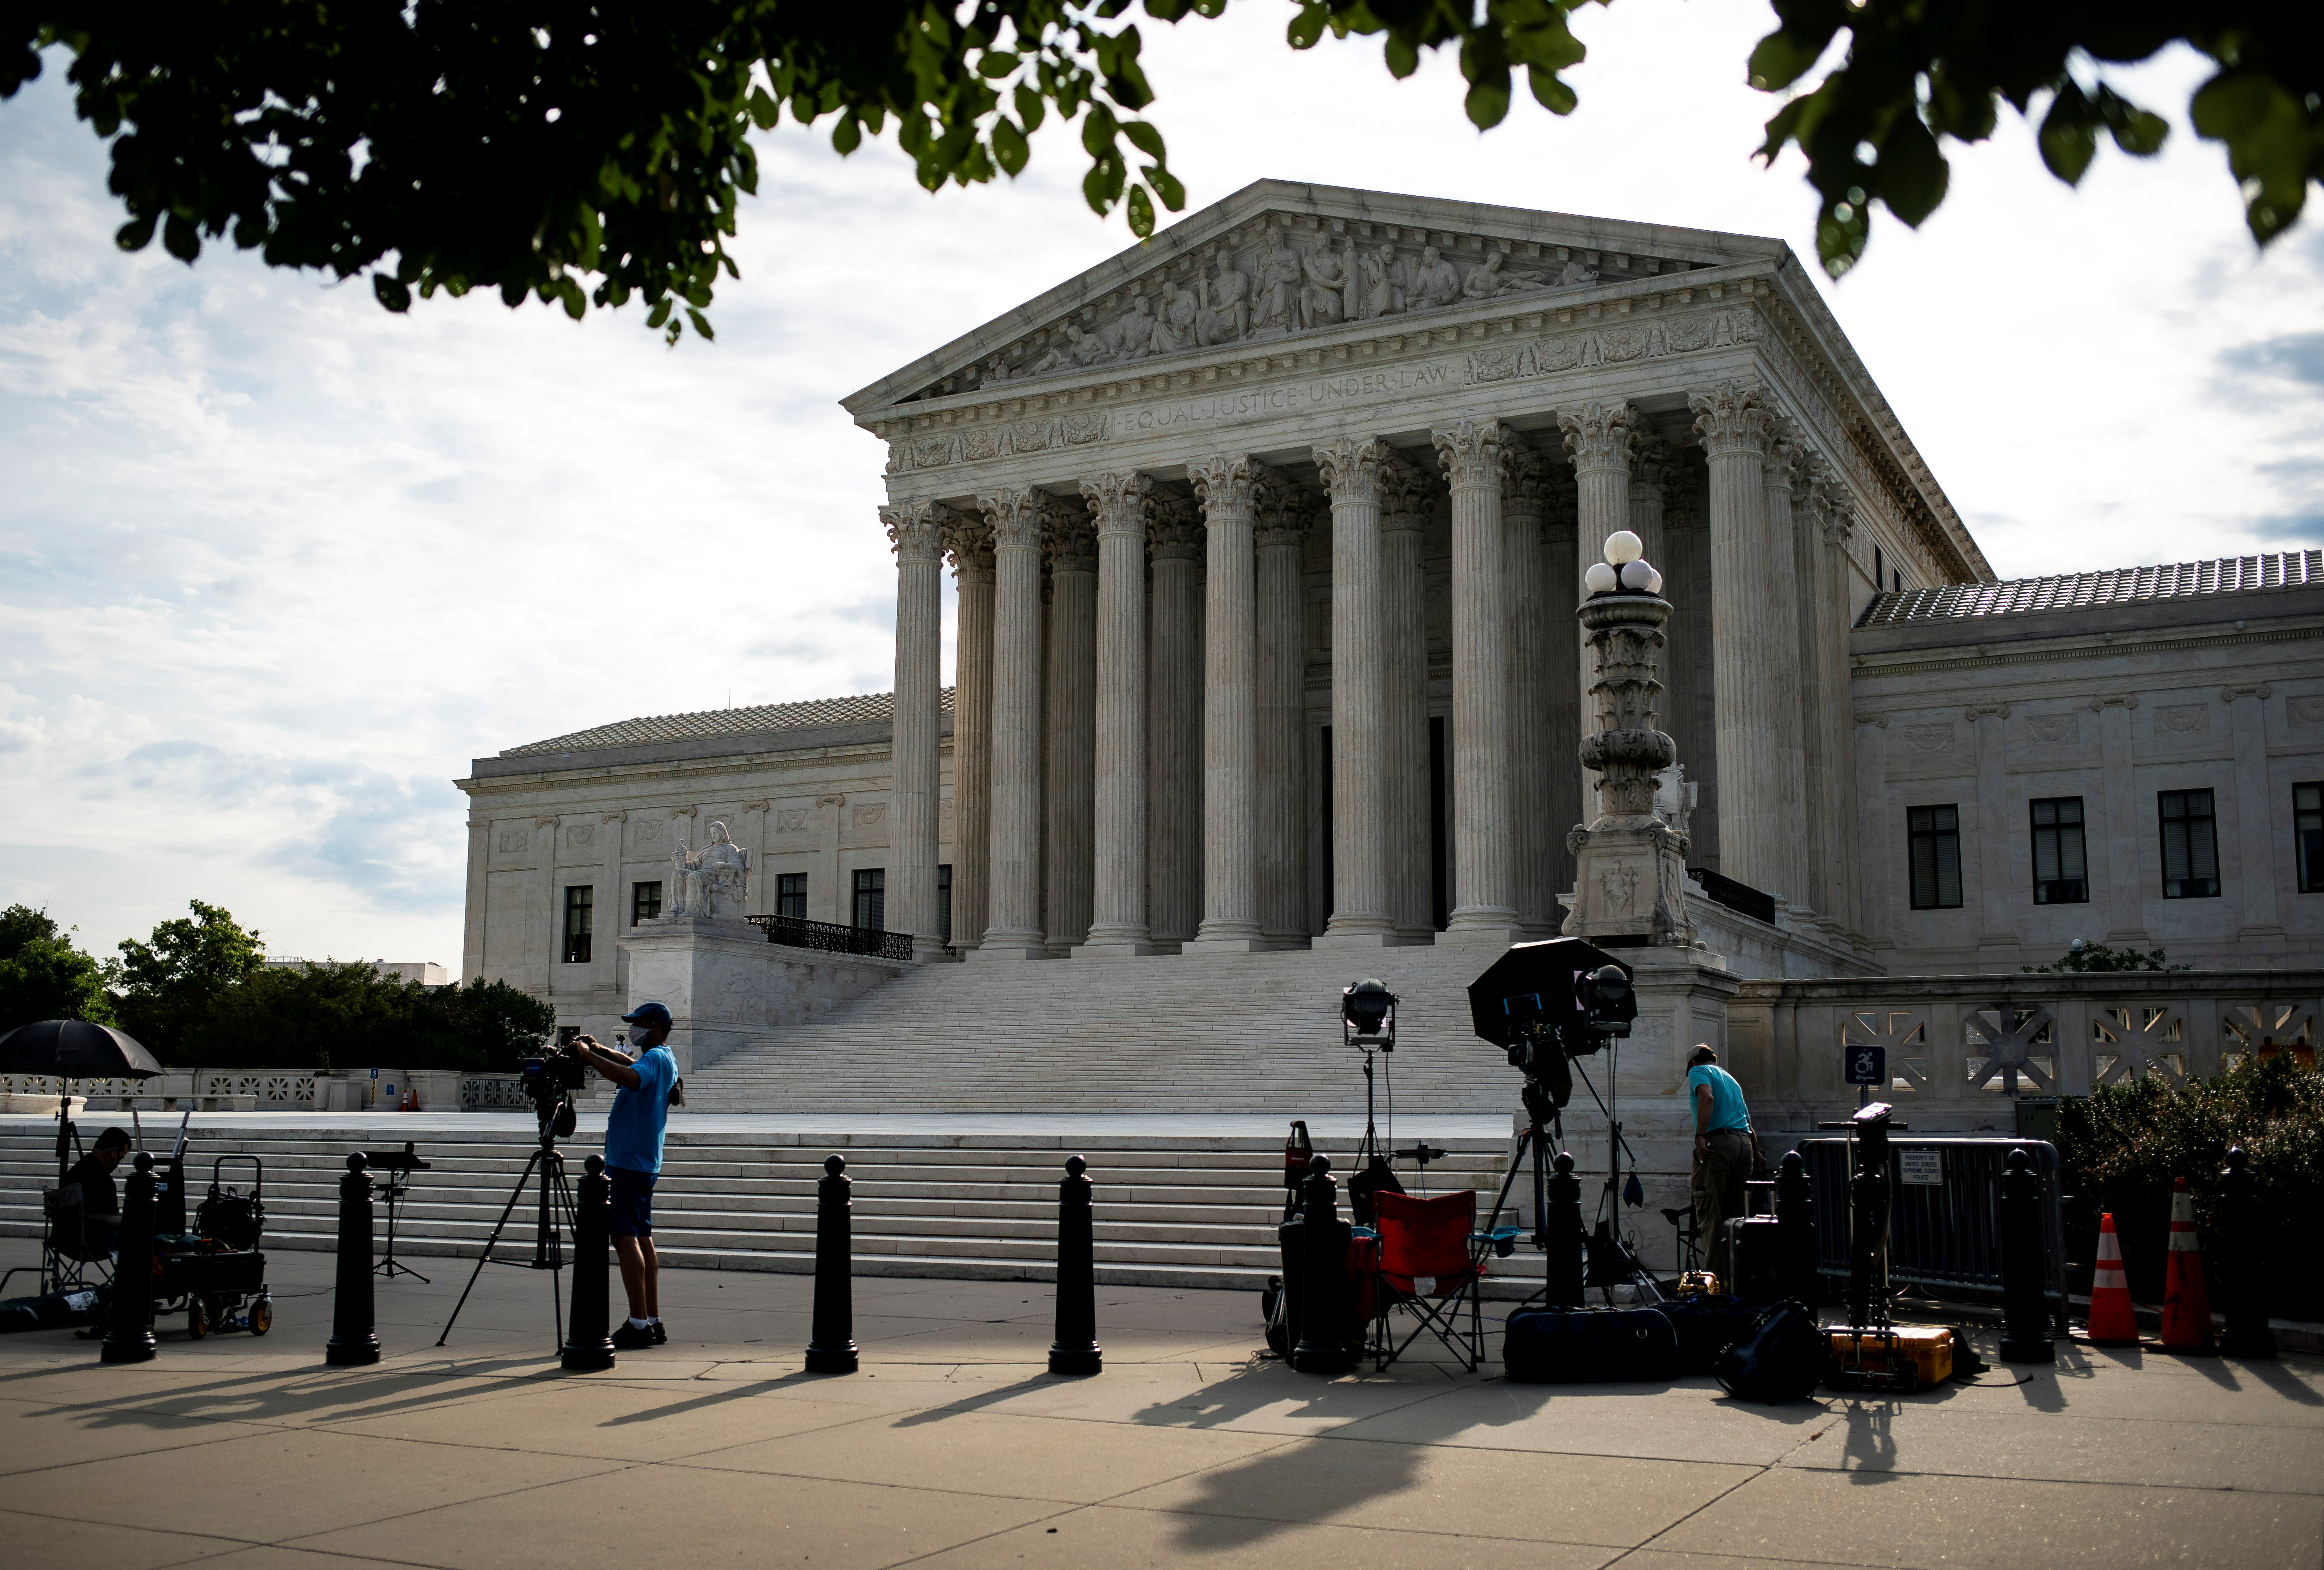 Members of the media set up in front of the U.S. Supreme Court building in Washington